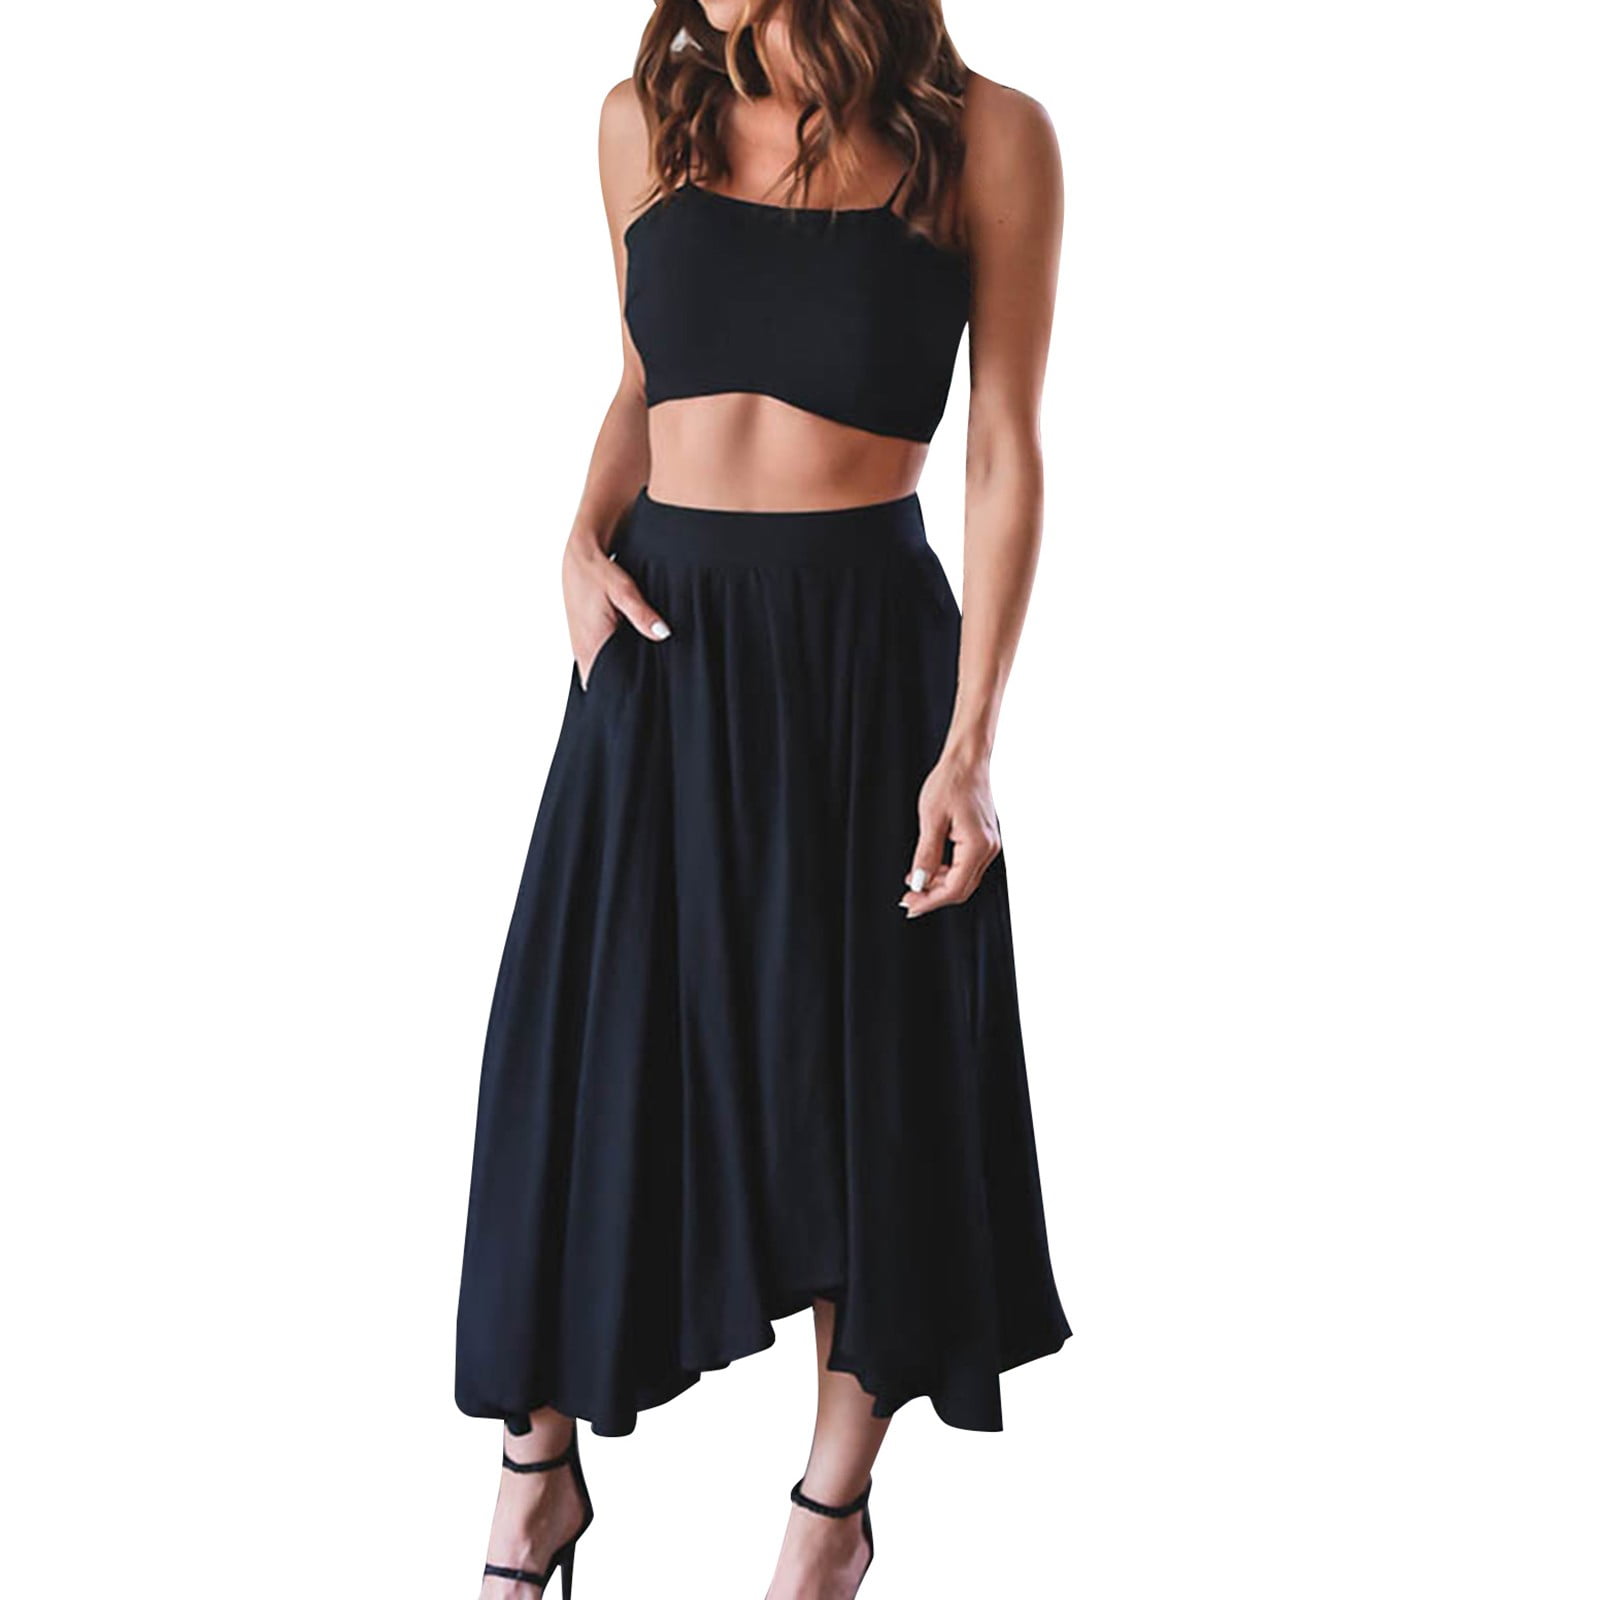 Plus Size Black PVC Crop Top & Pencil Skirt Set With Lace Trim Strapless  Summer Clubwear From Fashionqueenshow, $53.66